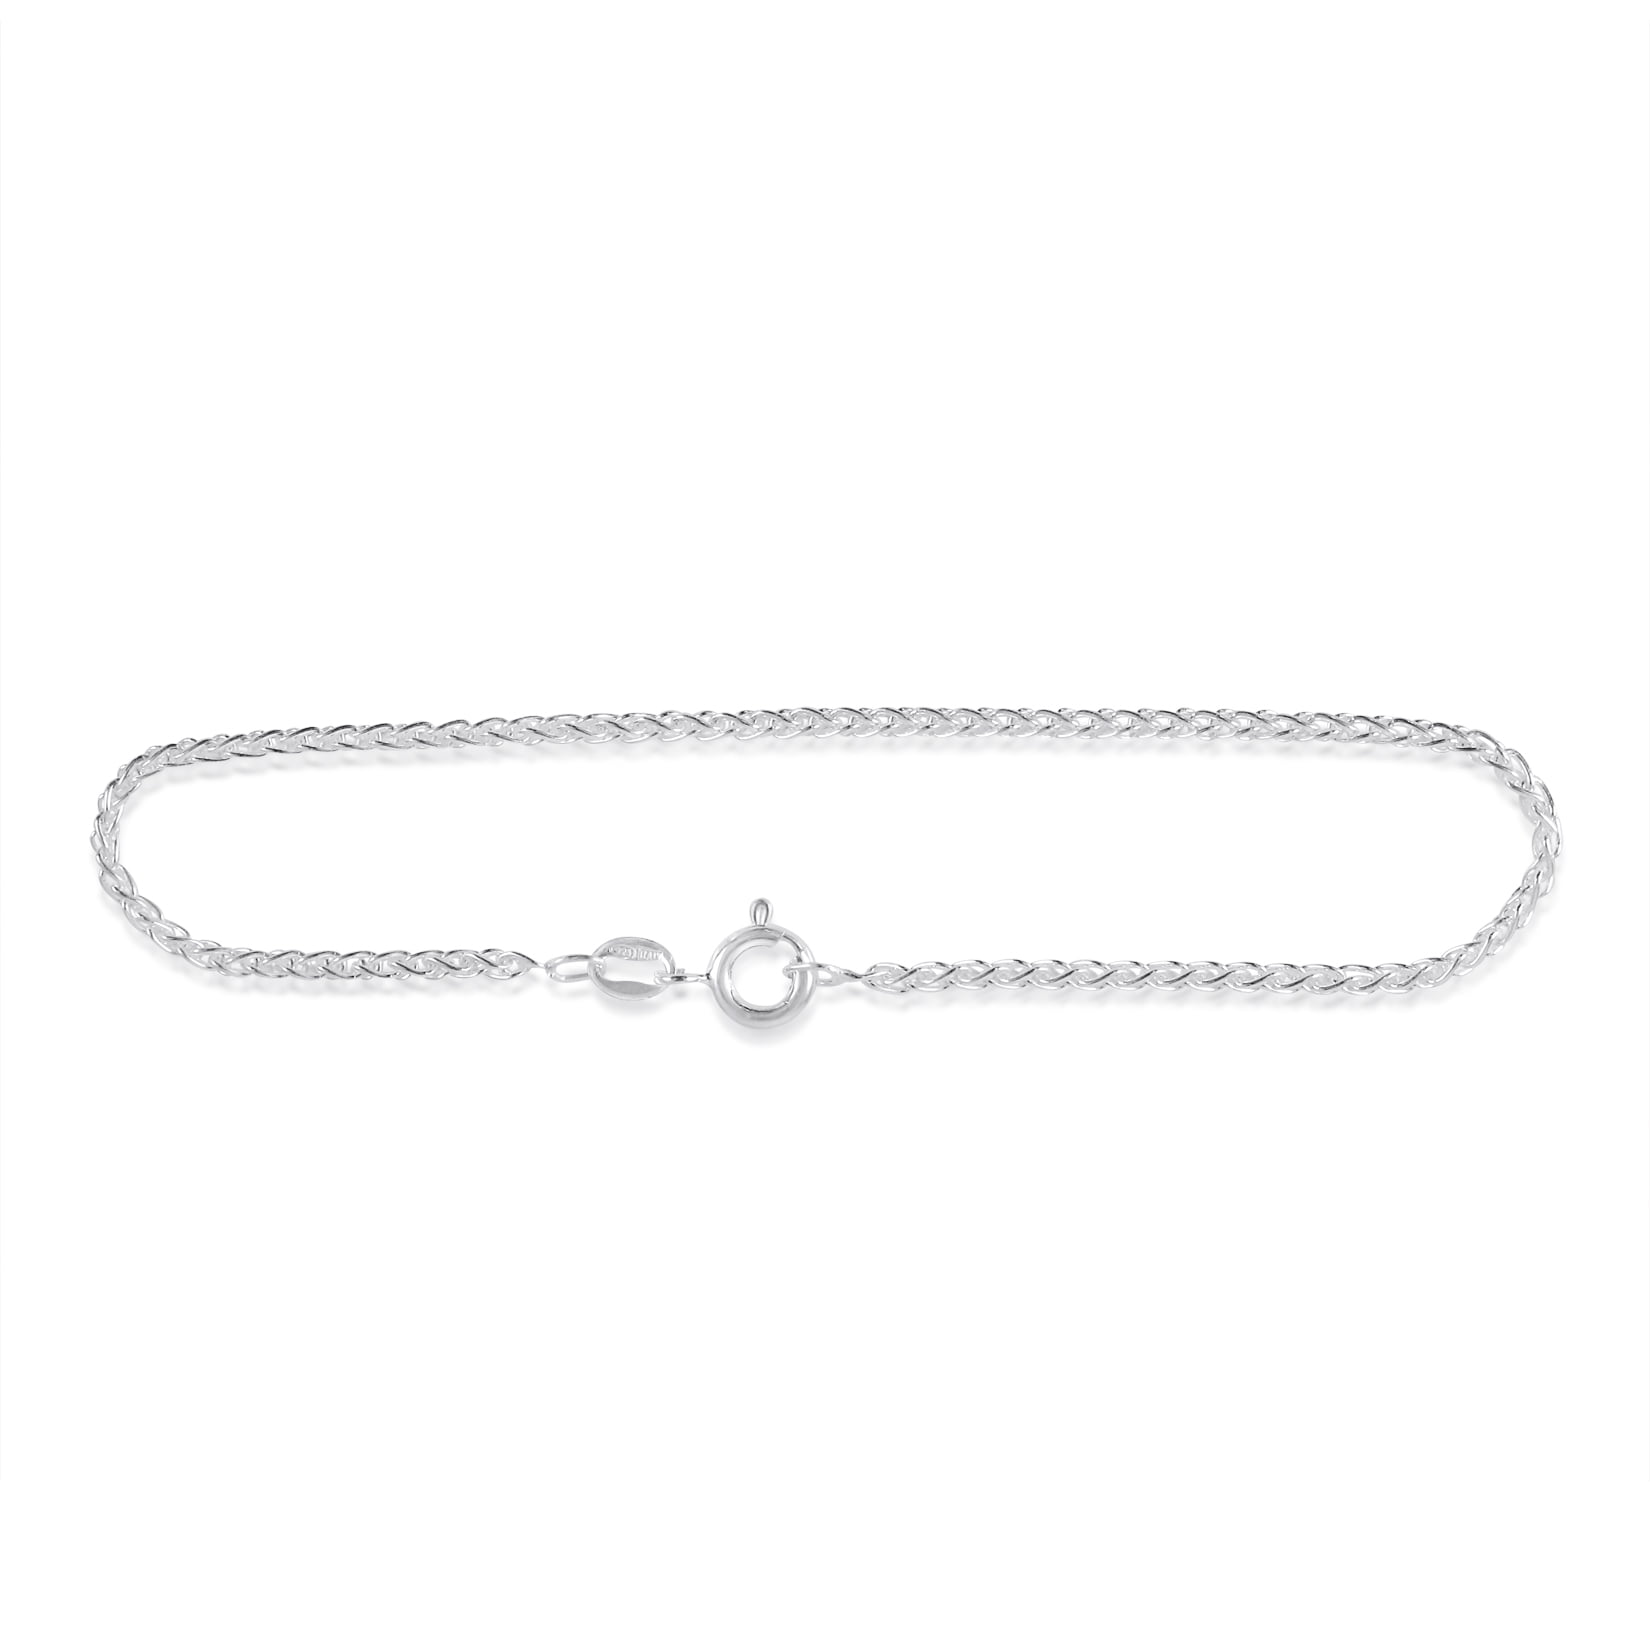 Size 7.25 Italy Sea of Ice Sterling Silver 1mm Square Snake Chain Bracelet for Women